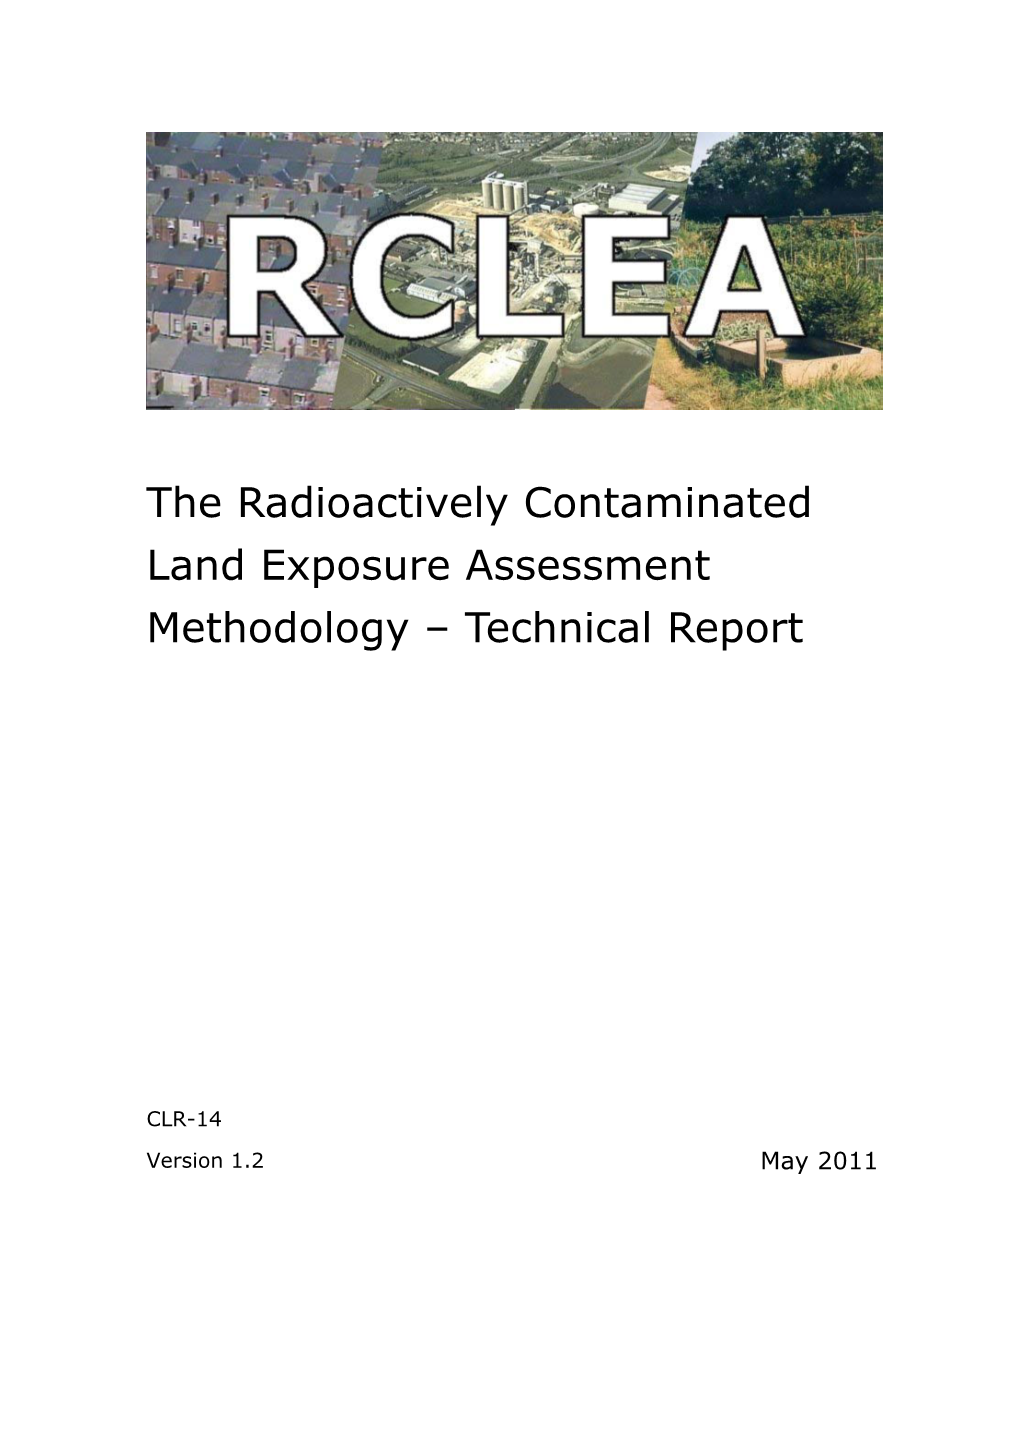 Radioactively Contaminated Land Exposure Assessment Methodology – Technical Report